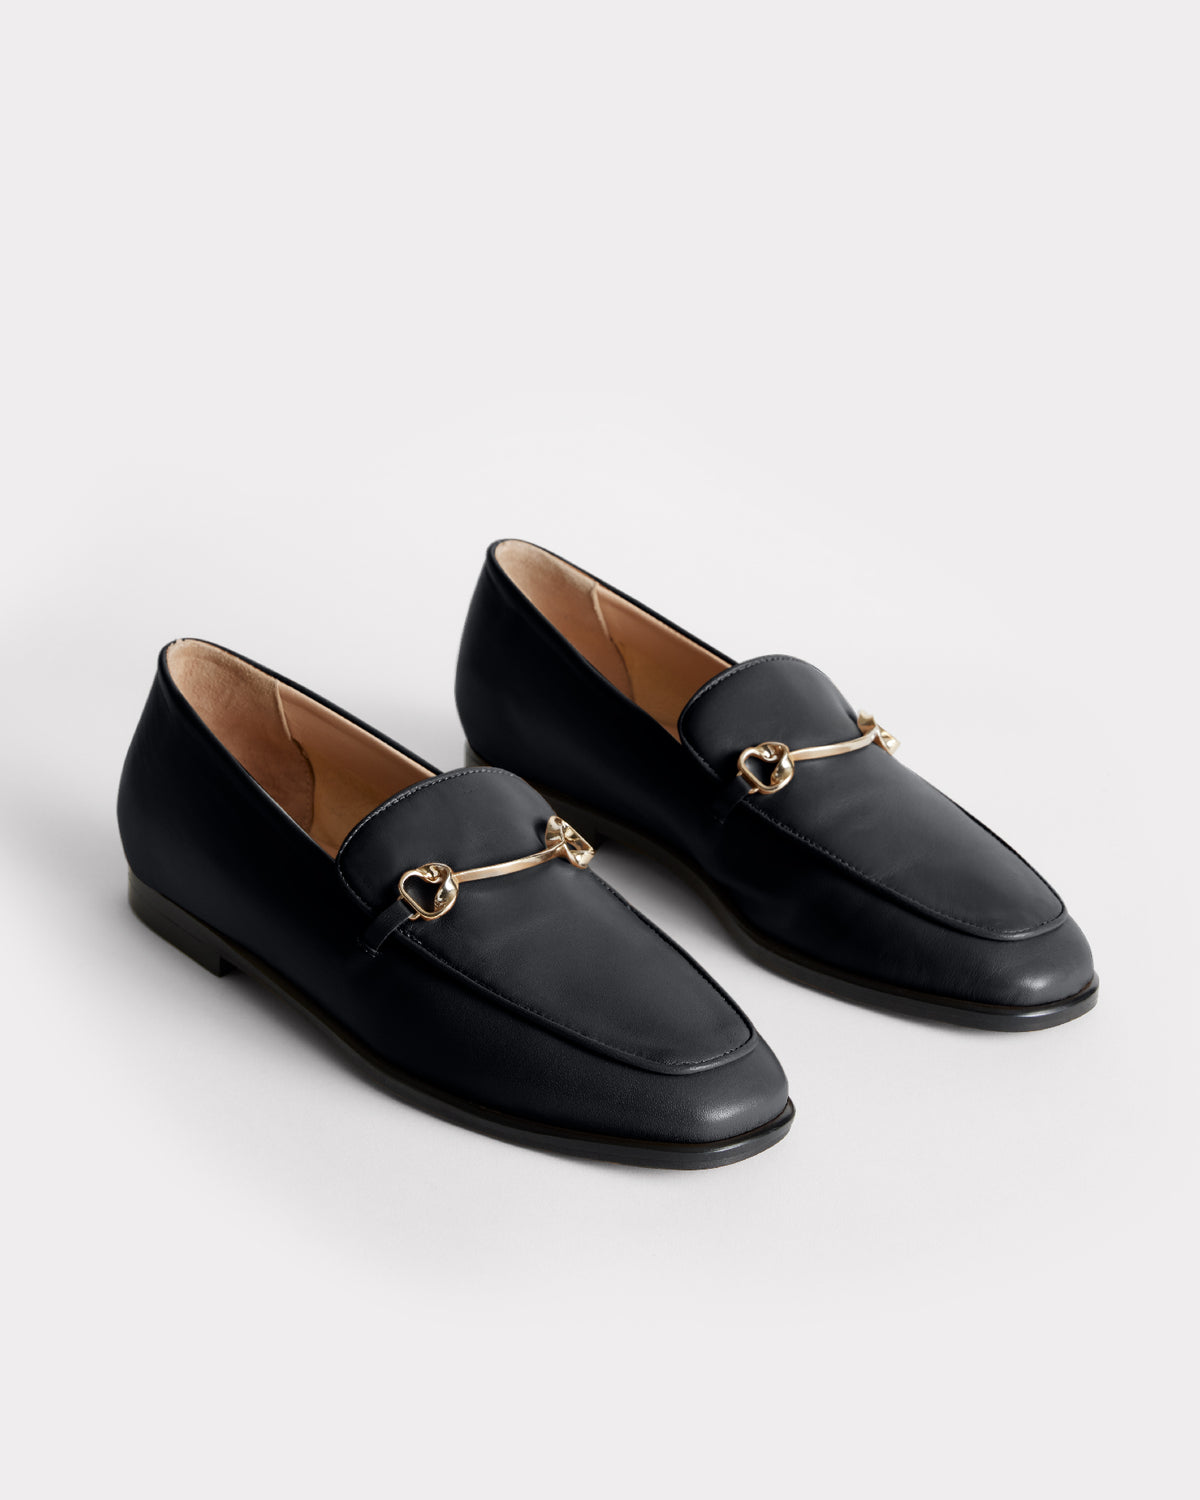 black leather slip on moccasin with recycled brass hardware